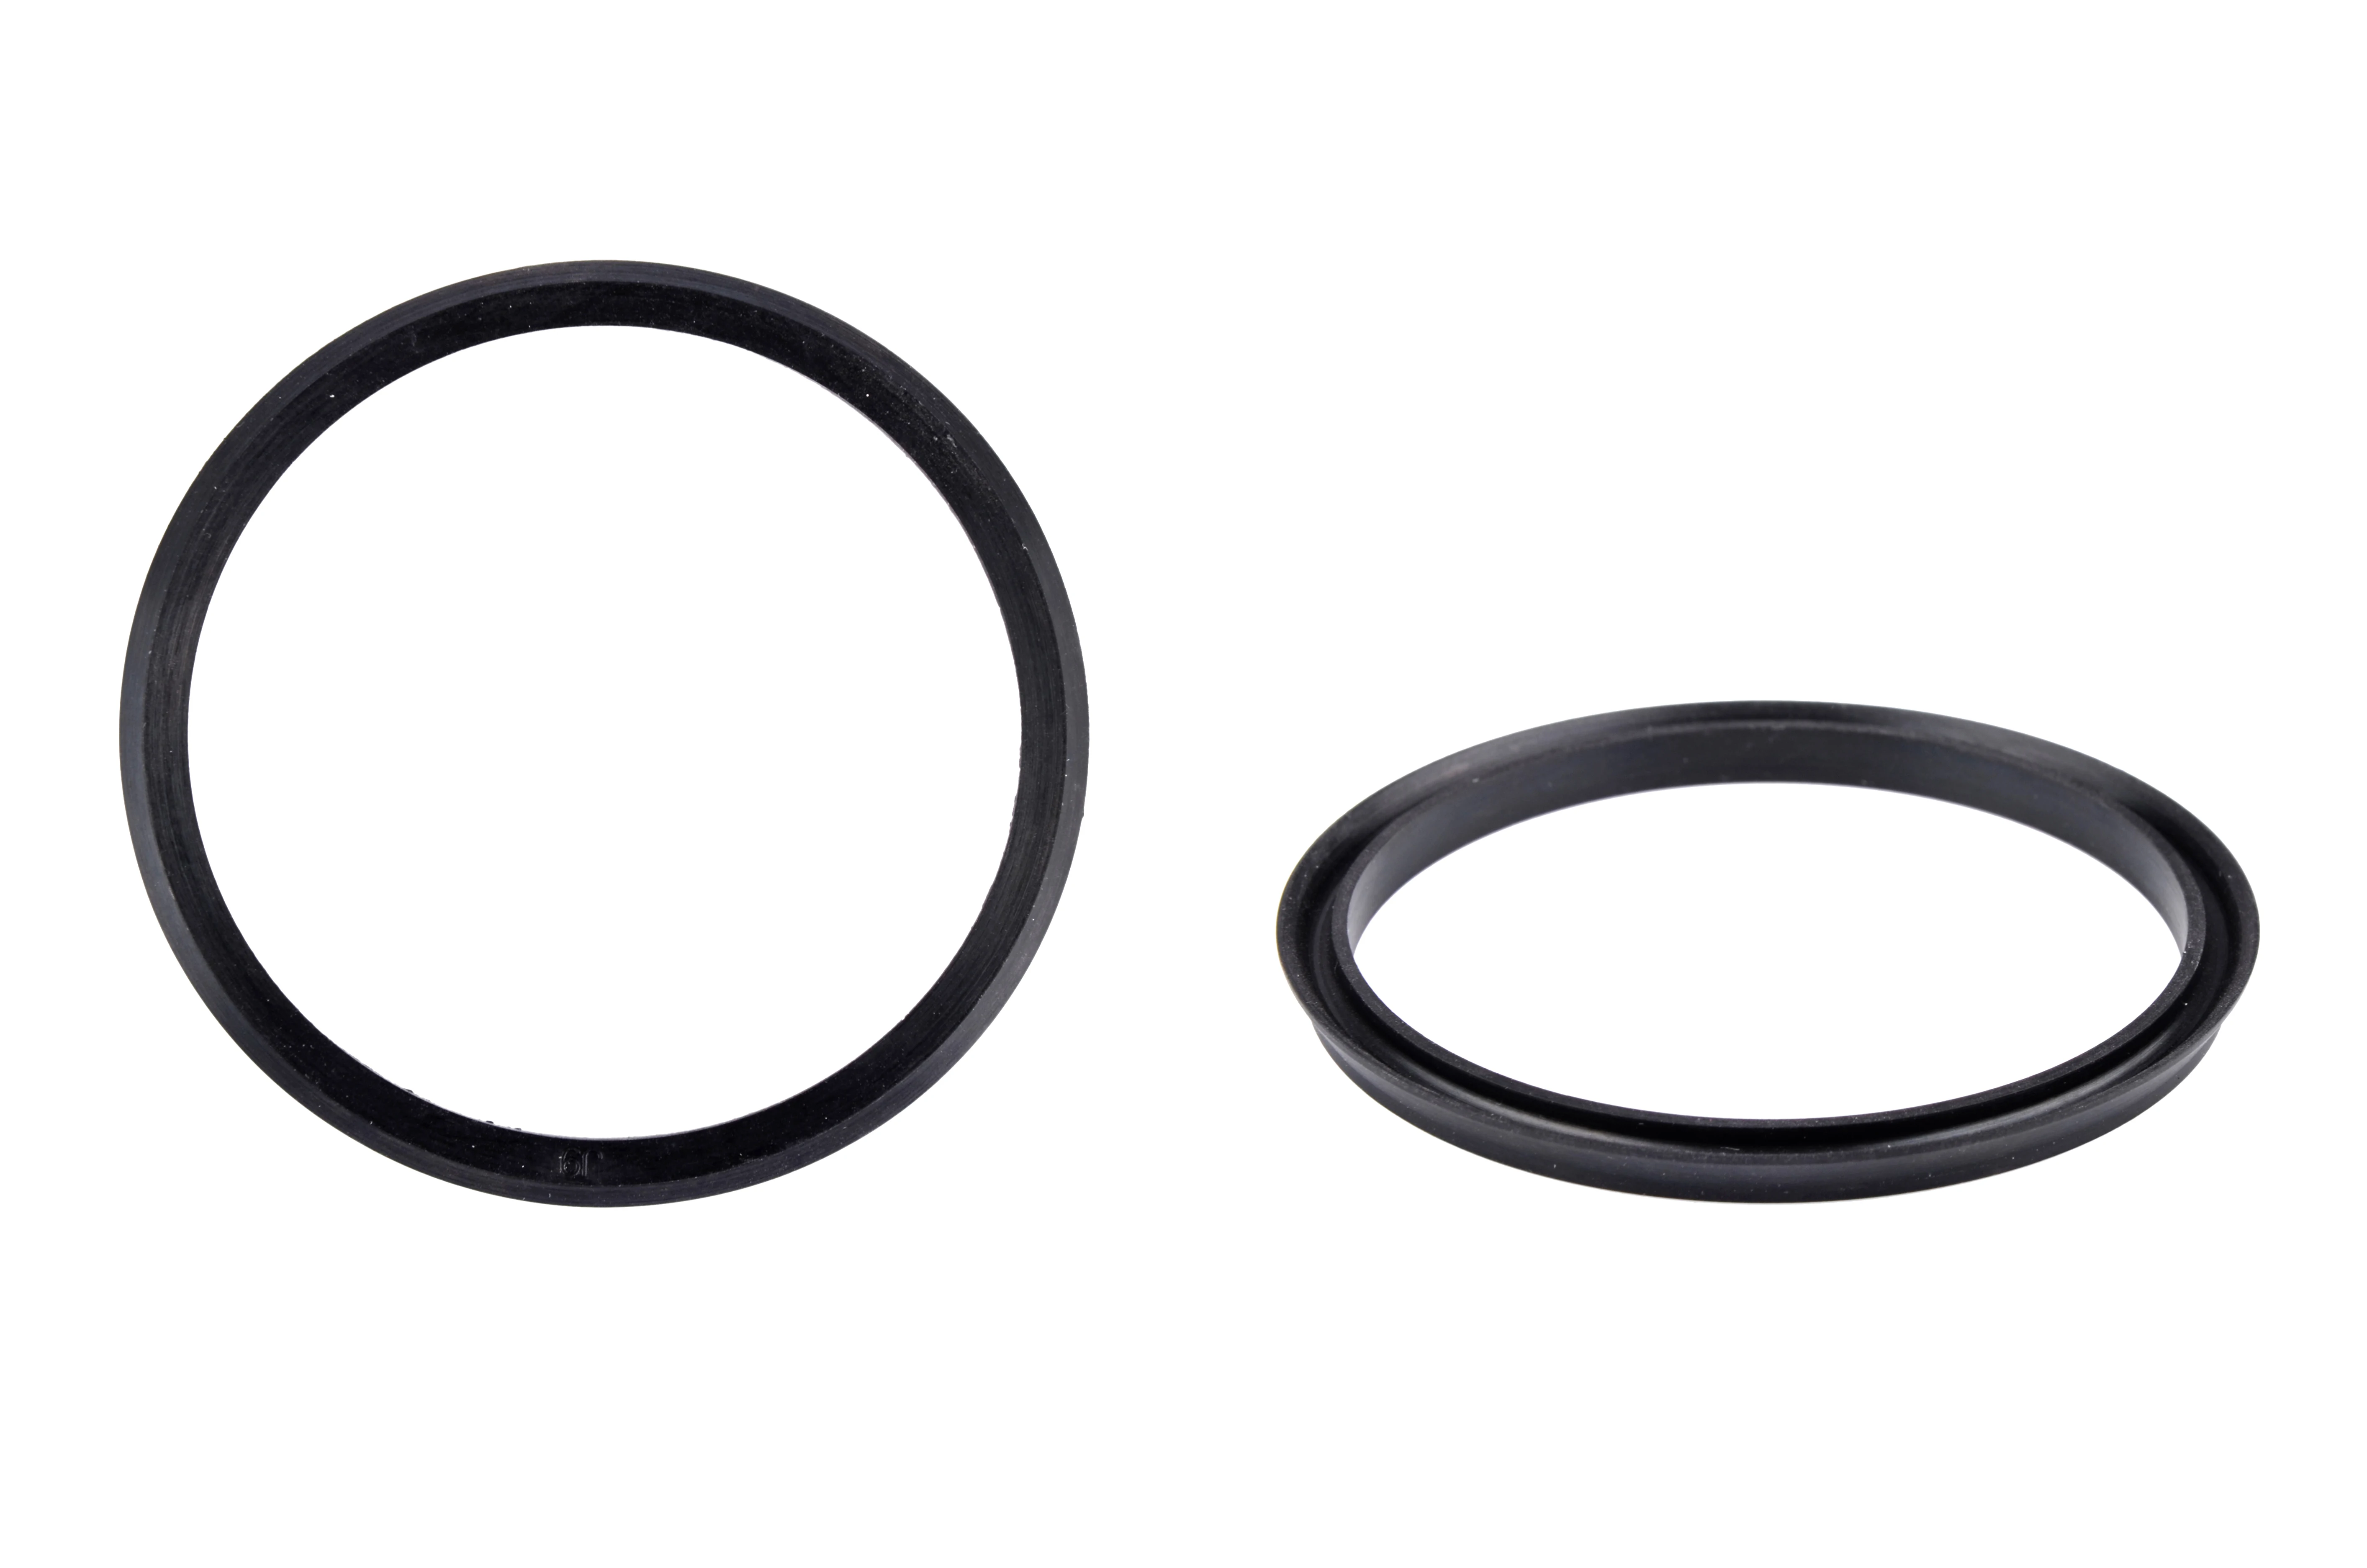 
Rubber Sealing Gasket with High Quality CN;FUJ Customize Size PE ISO Certificate Flat Silicone Bag Carton BS 